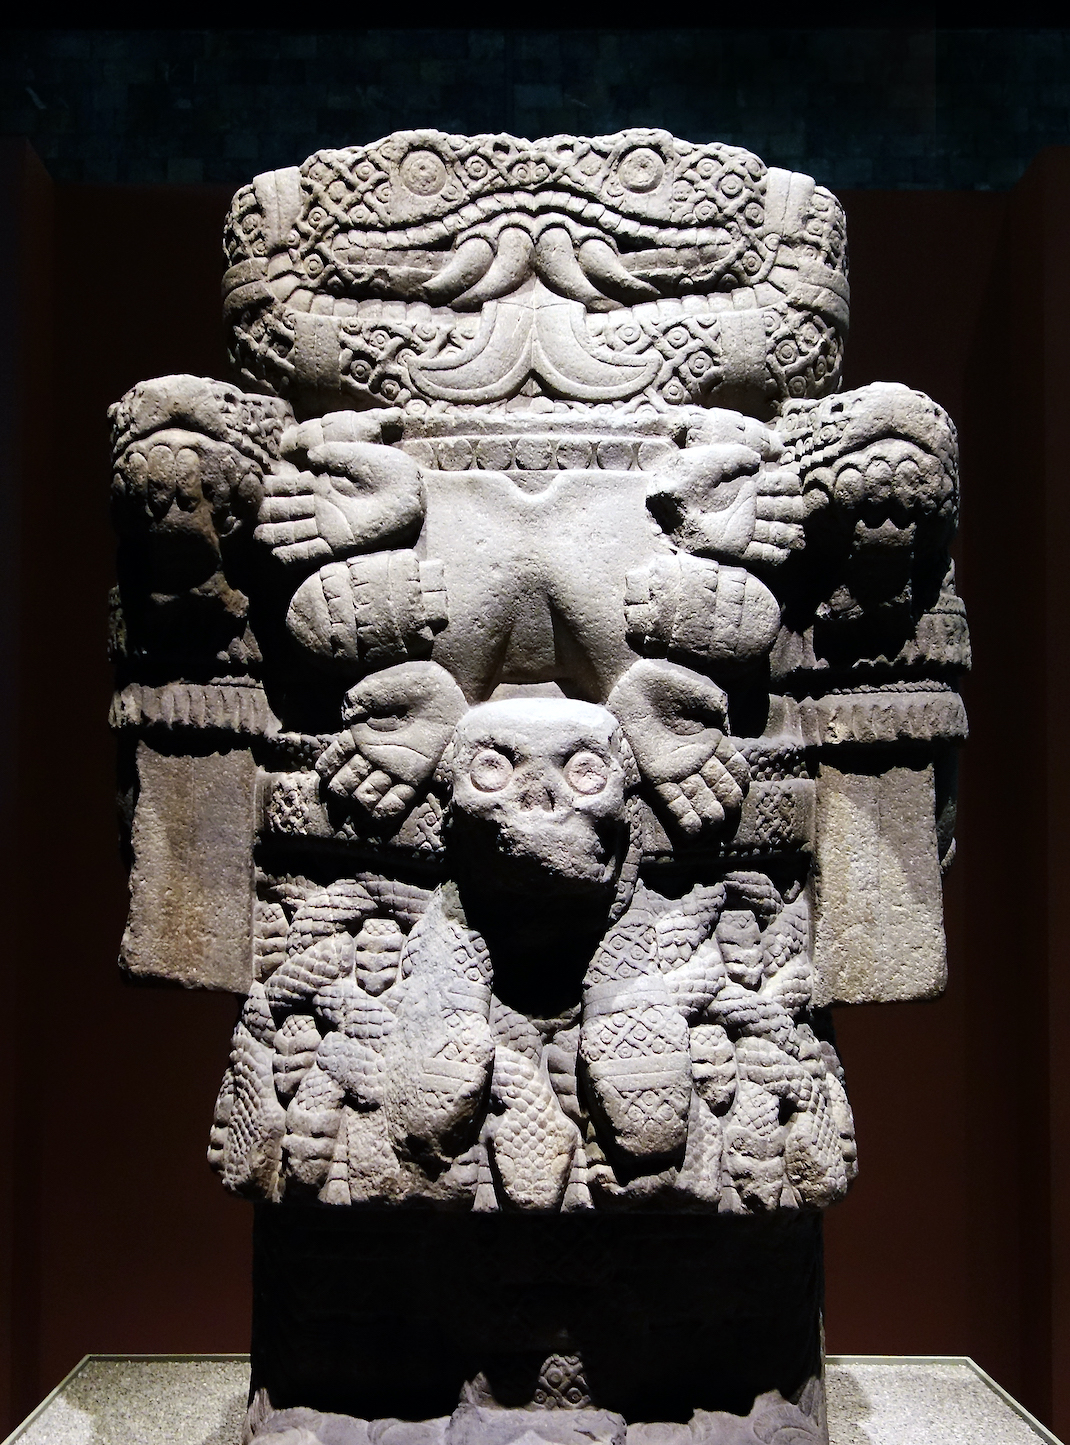 Coatlicue, c. 1500, Mexica (Aztec), found on the SE edge of the Plaza mayor/Zocalo in Mexico City, basalt, 257 cm high (National Museum of Anthropology, Mexico City; photo: Steven Zucker, CC BY-NC-SA 2.0)